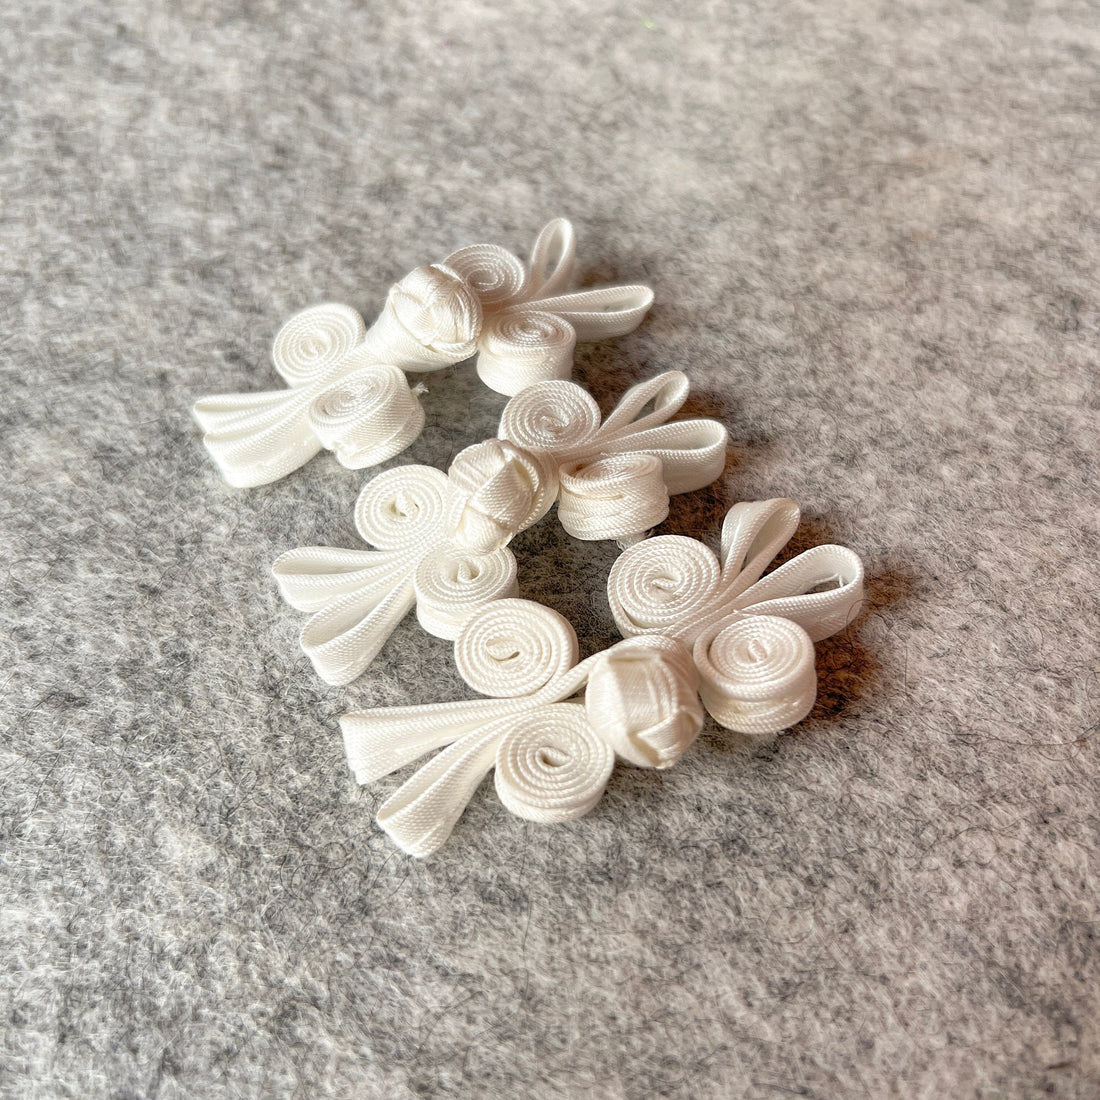 Knot Frog Button (White, Set of 2) Cheongsam Pankou Button Qipao Decorative Closure, Chinese Button, Handtied Button, Fancy Chinese Button